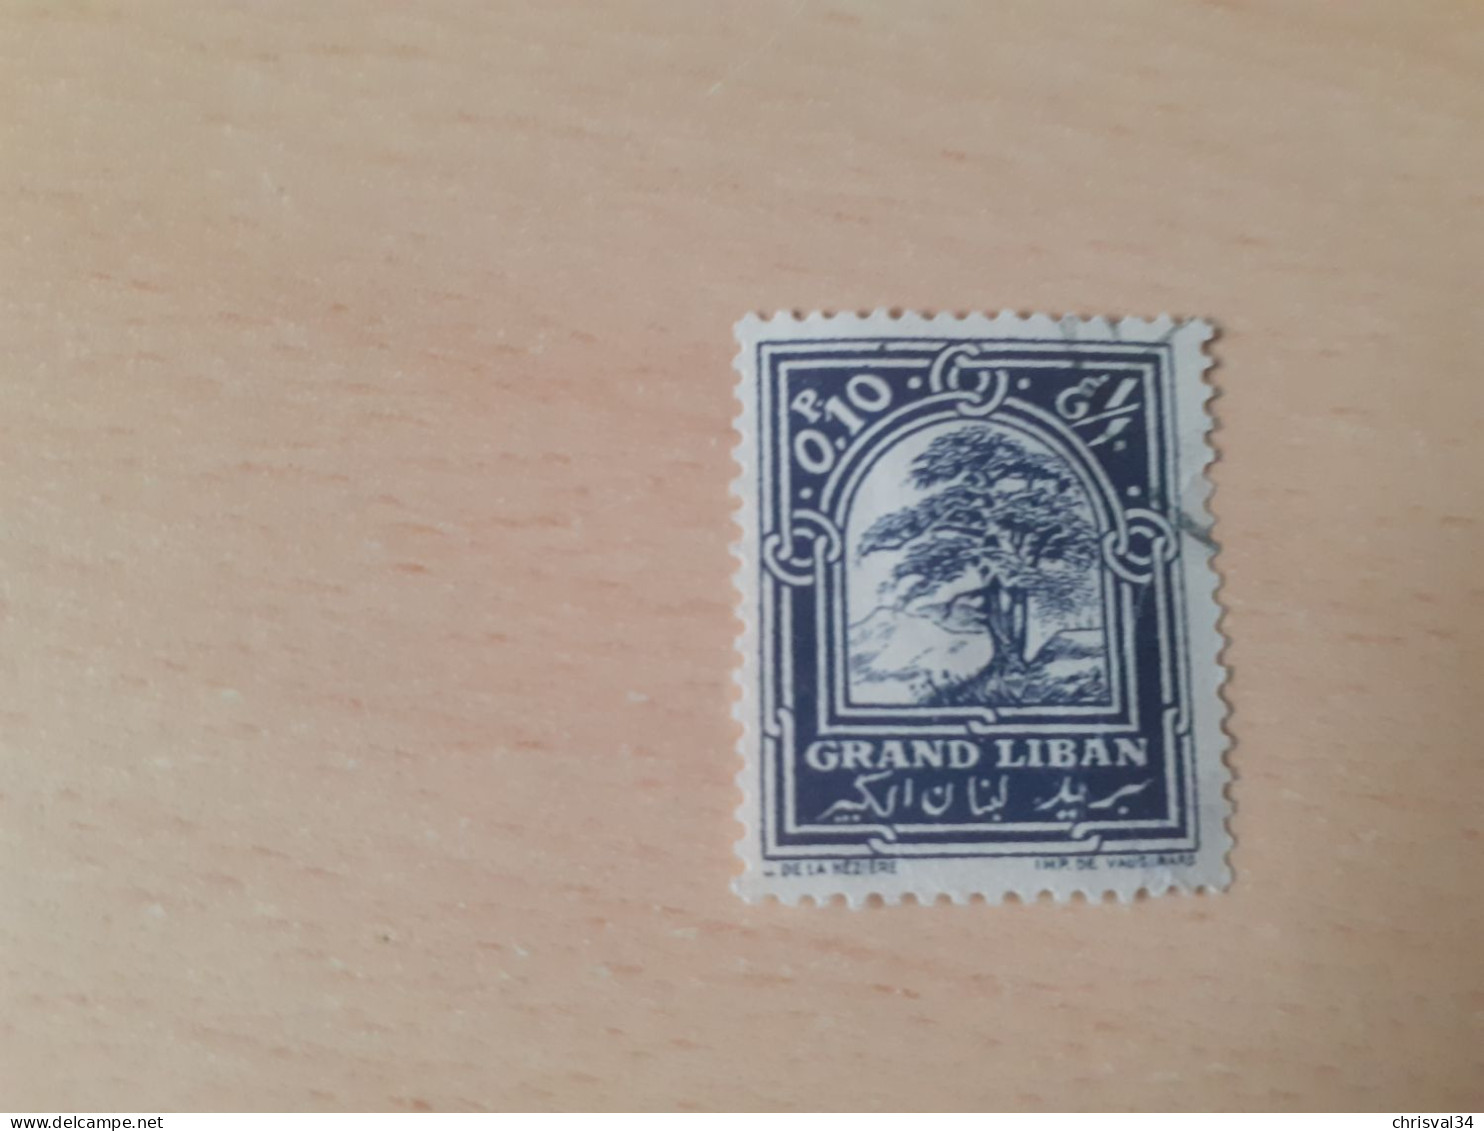 TIMBRE   GRAND  LIBAN       N  50       COTE  0,50  EUROS    OBLITERE - Used Stamps